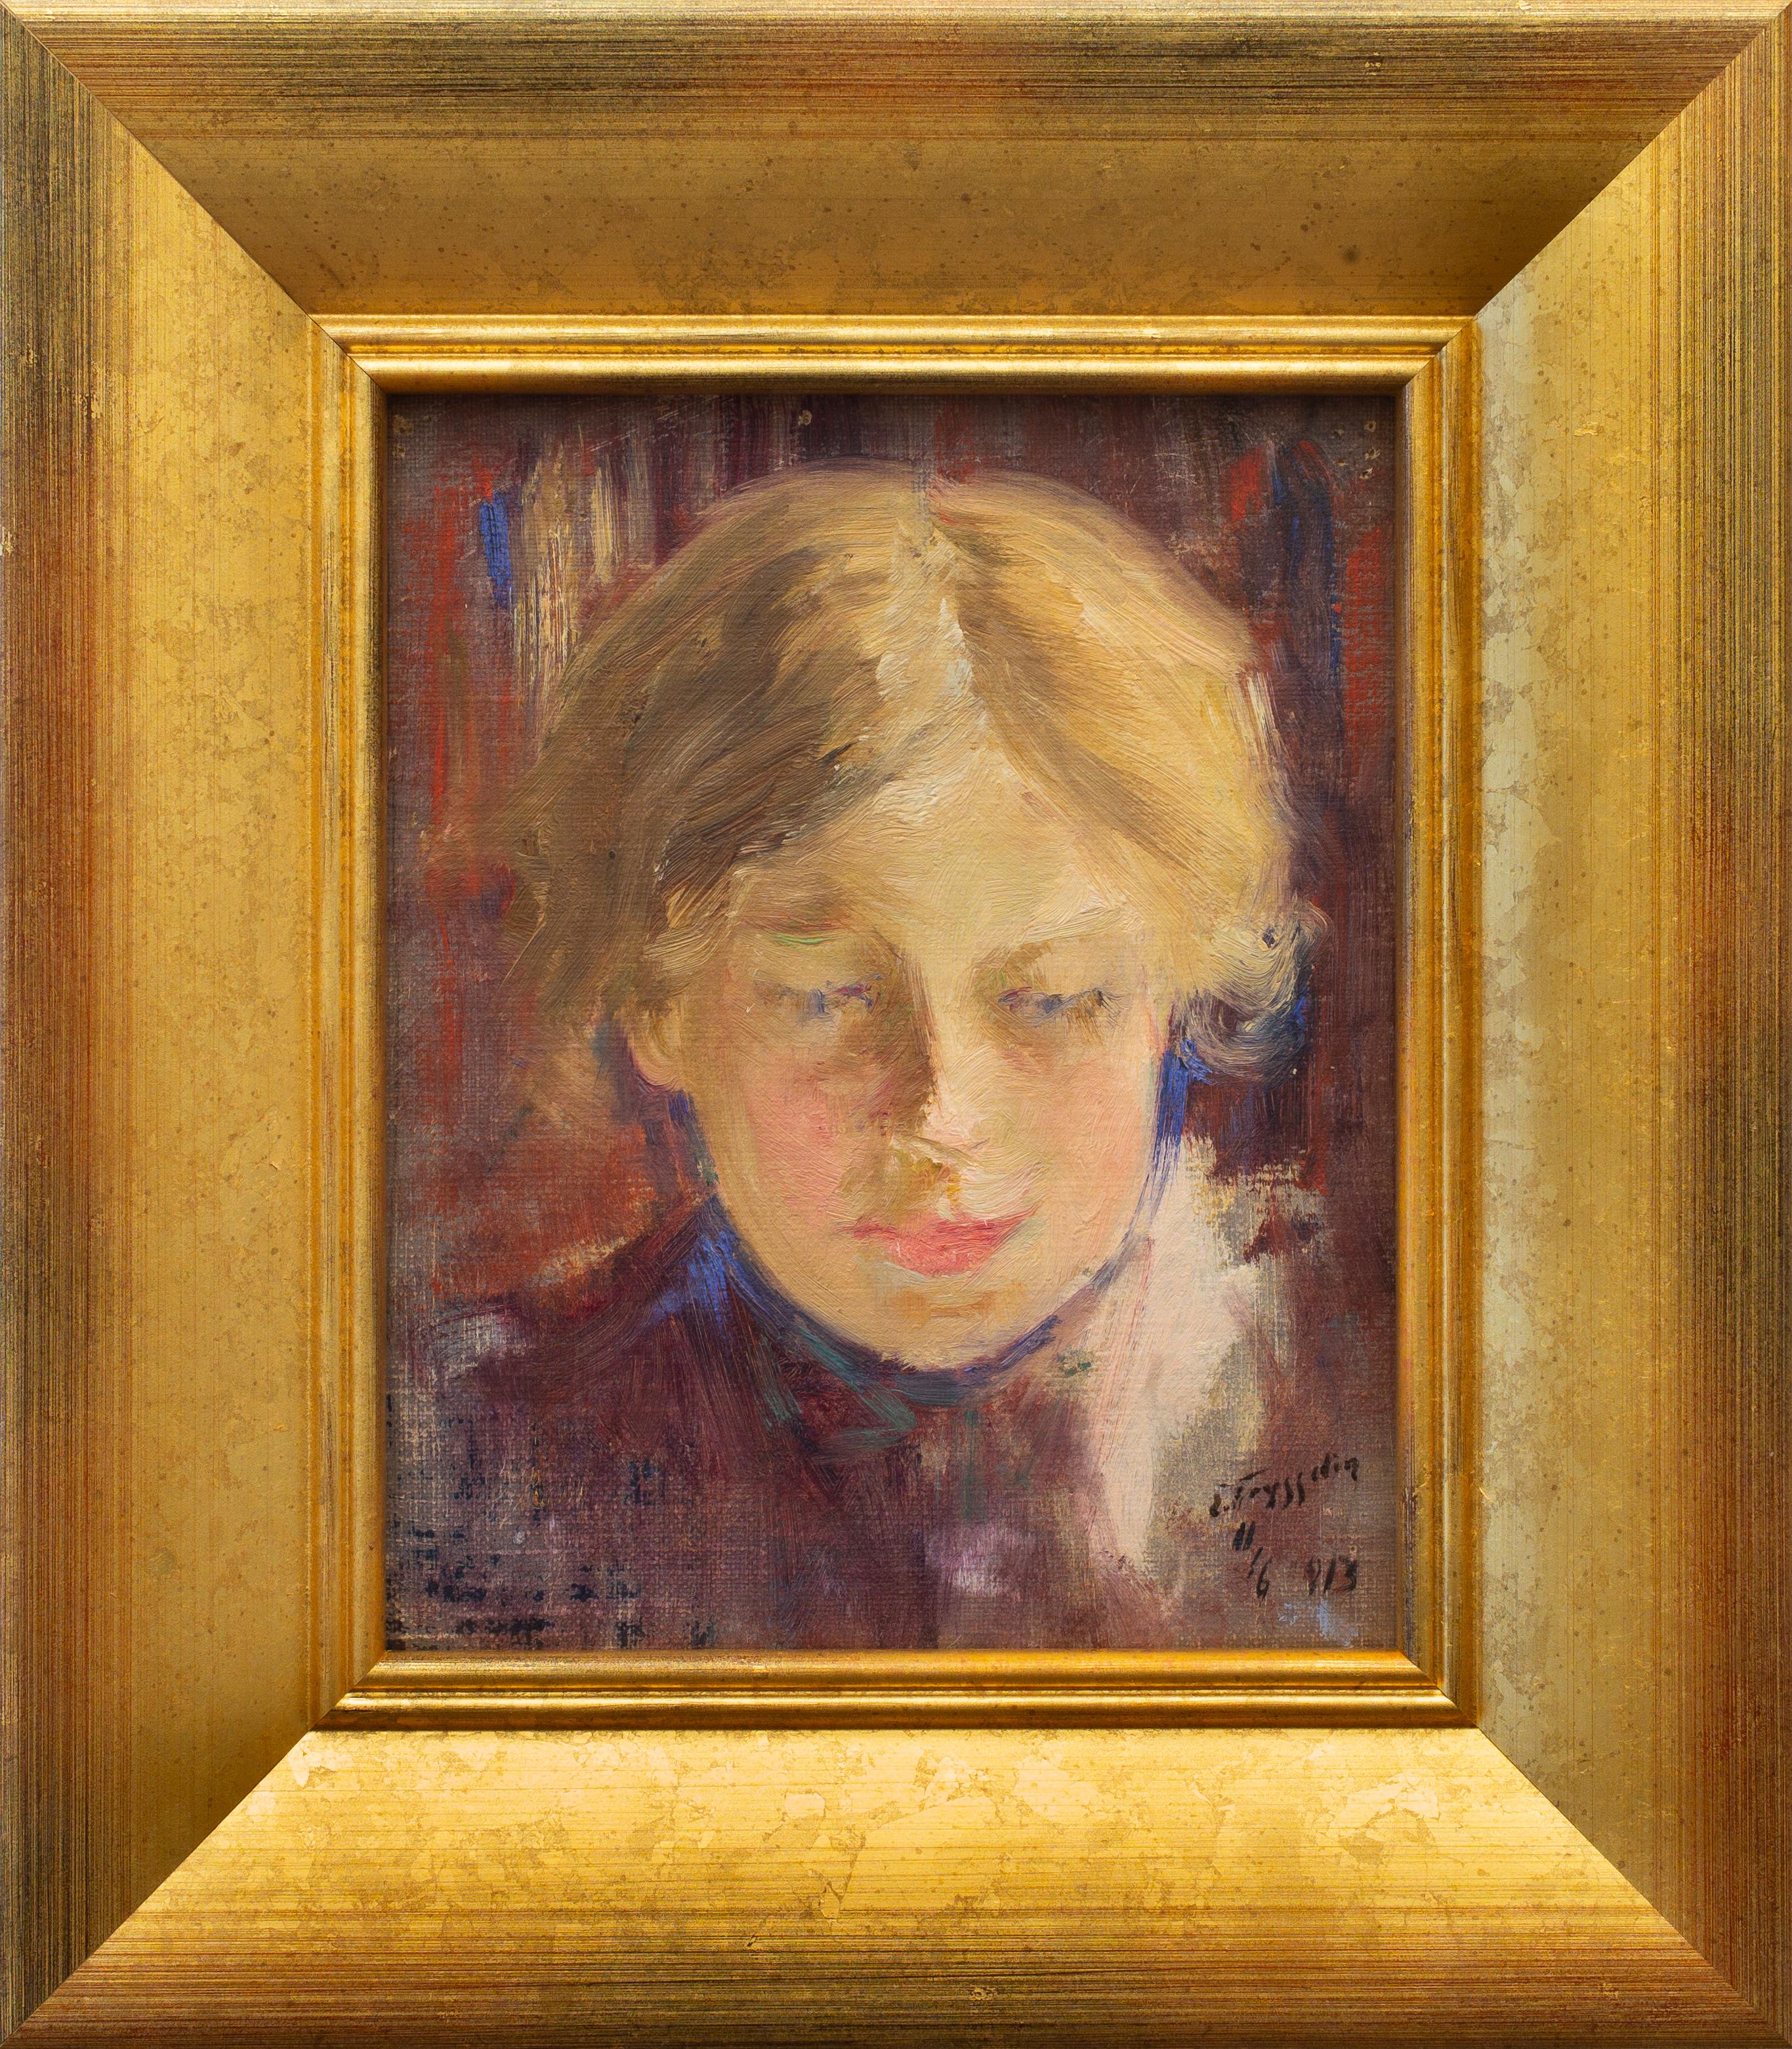 Erik Tryggelin (1878-1962) Sweden

A Portrait, 1913

signed and dated E Tryggelin 11/6 1913  
oil on canvas laid on masonite
canvas dimensions 7.48 x 5.90 inches (19 x 15 cm)
frame 12.20 x 10.62 inches (31 x 27 cm)

Erik Tryggelin was born in 1878